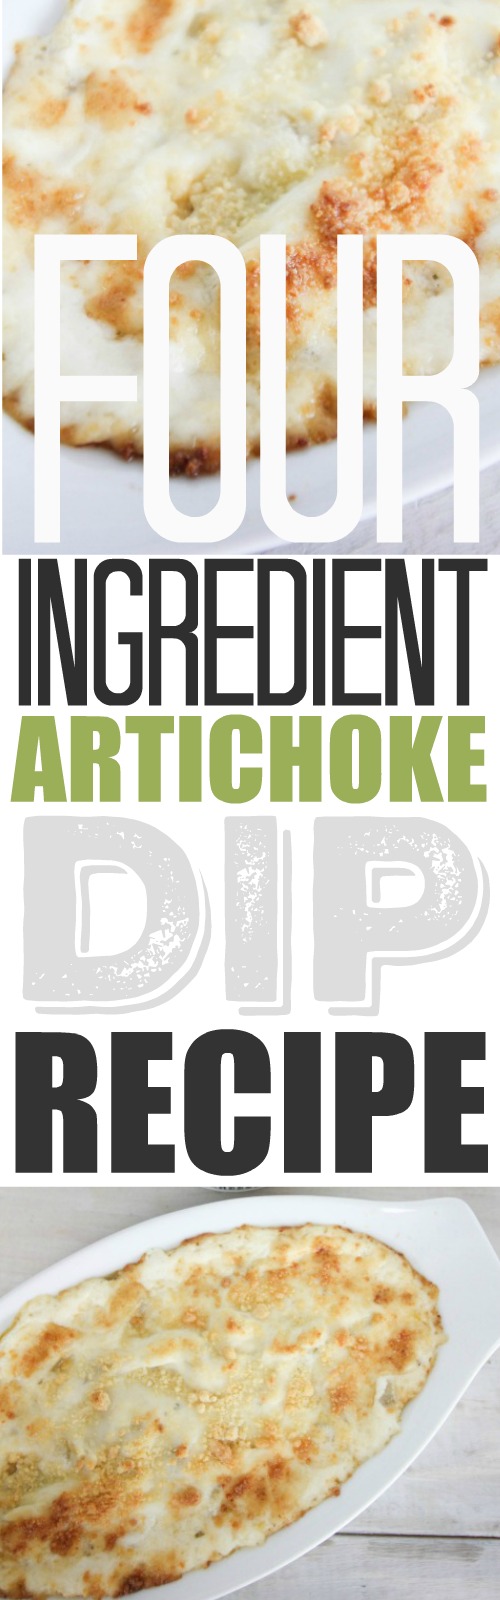 Four ingredient artichoke dip is definitely one recipe you'll want to add to your bag of tricks for any game day or get together!